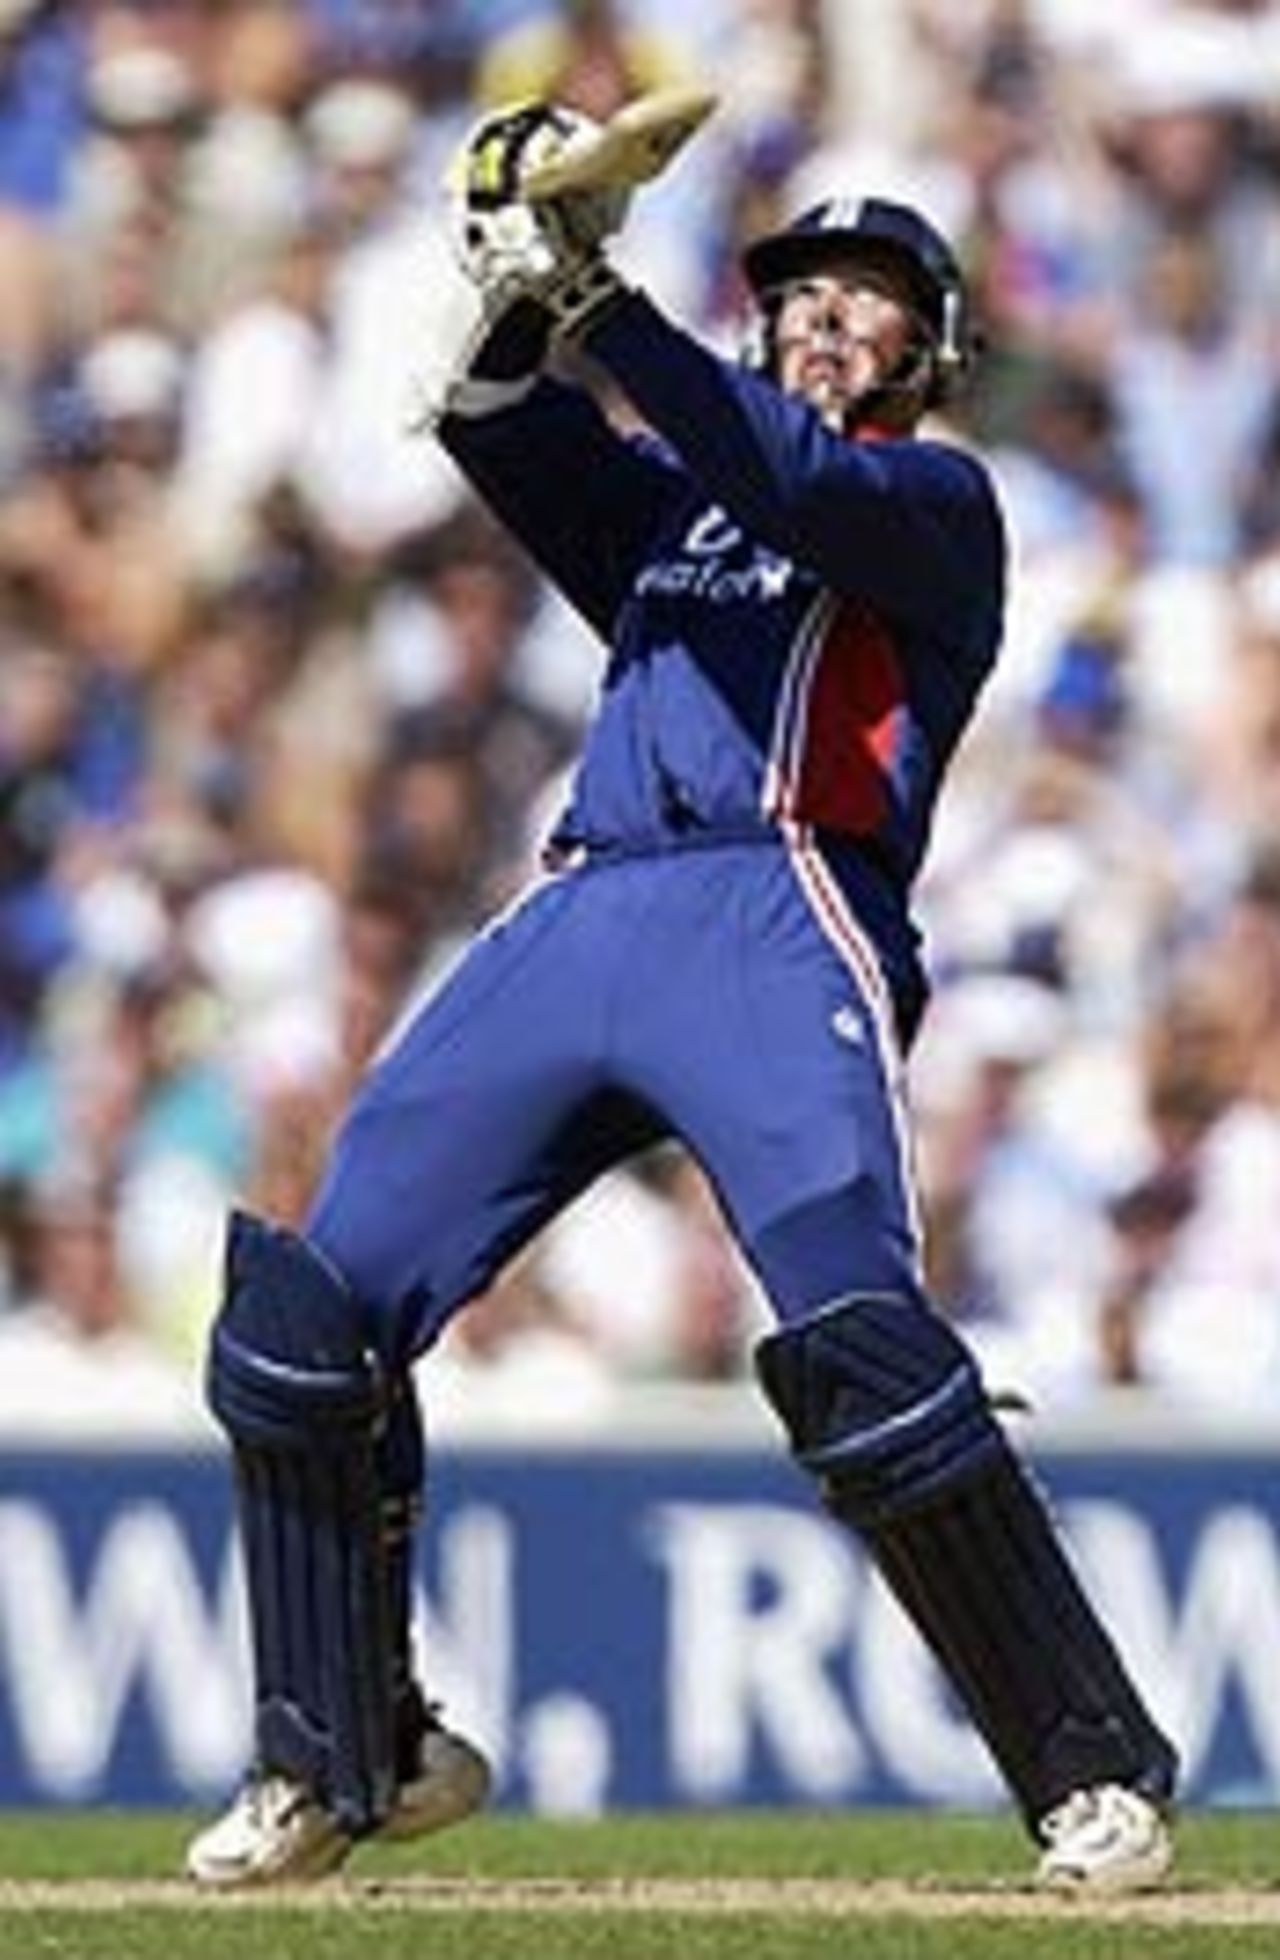 Marcus Trecothick lofts over slips for six, England v Pakistan, June 20, 2003